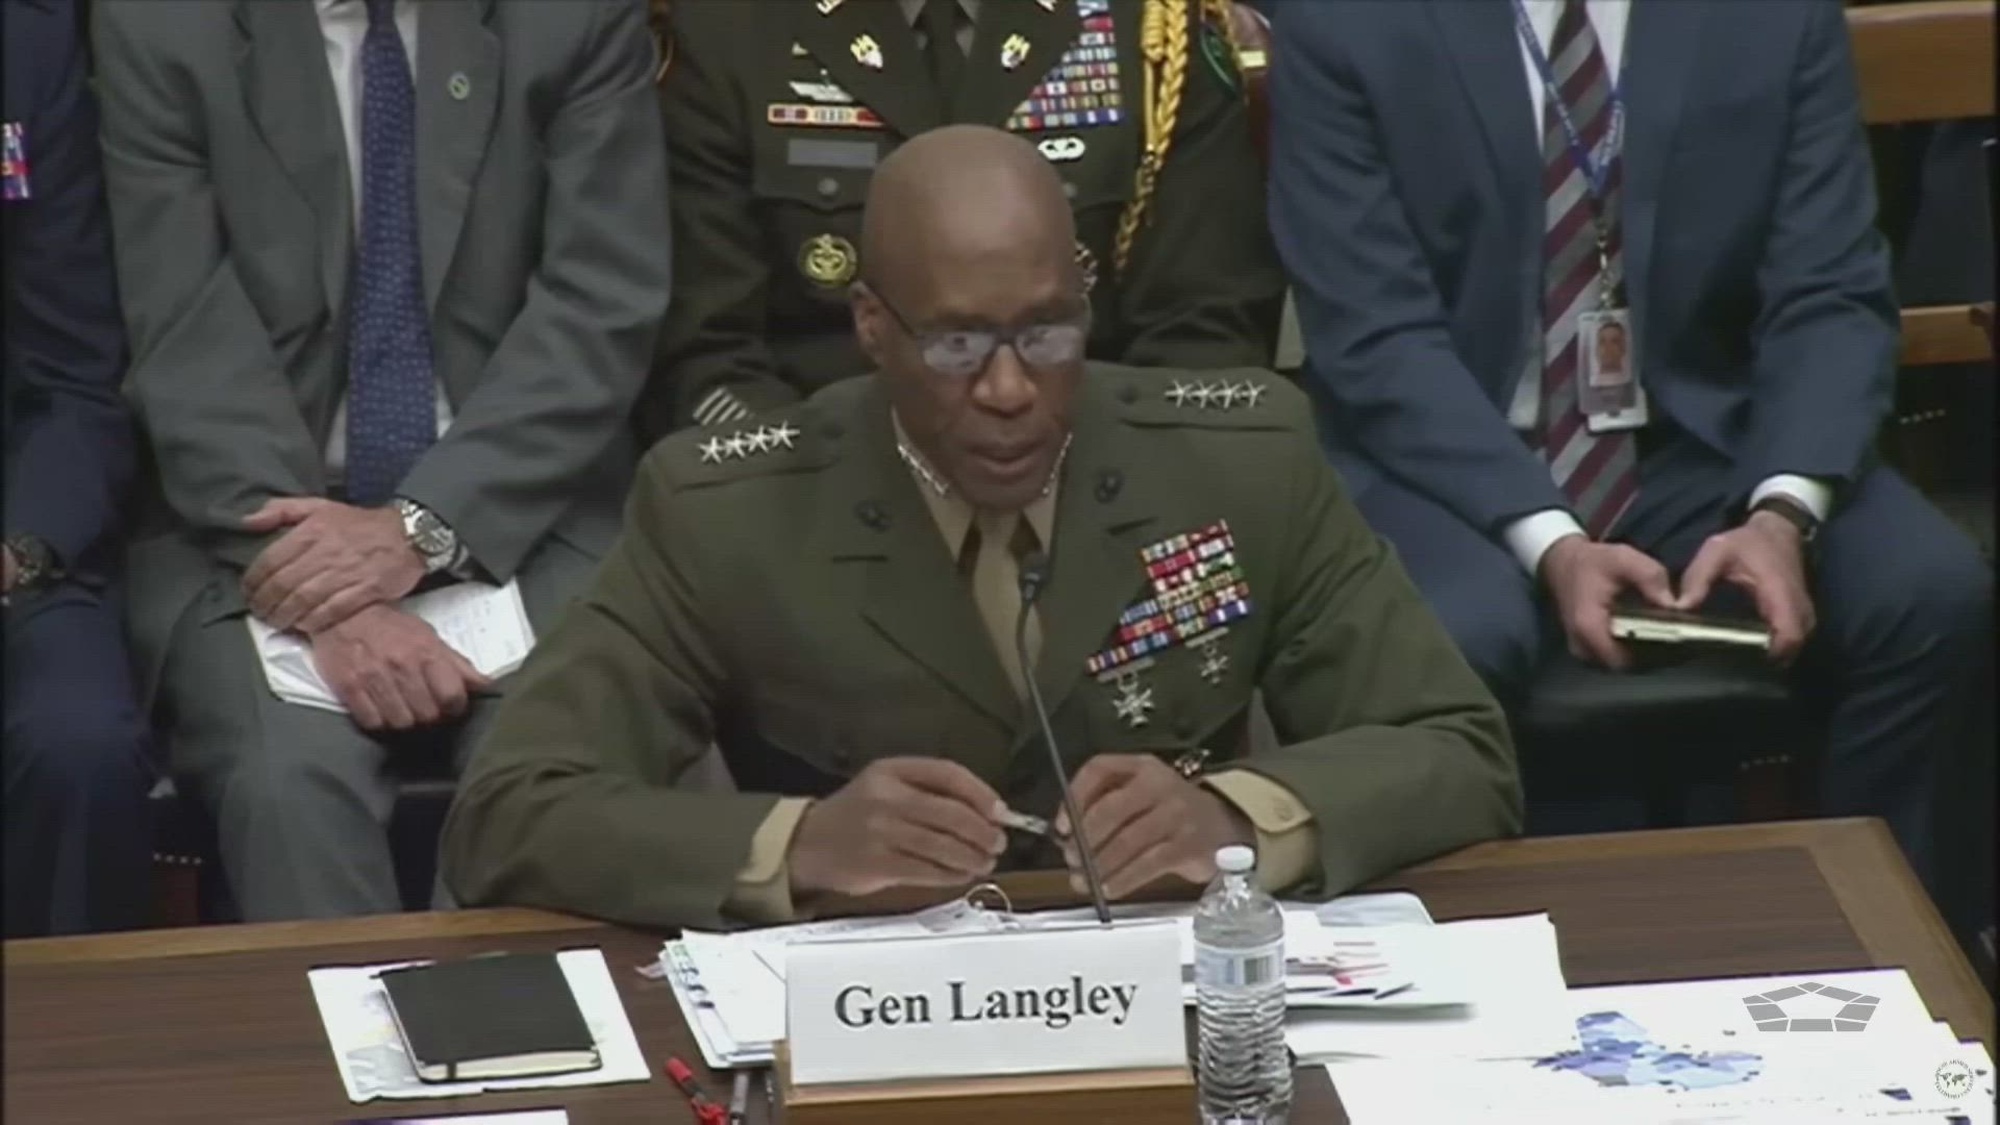 Army Gen. Michael E. Kurilla, commander of U.S. Central Command; Marine Corps Gen. Michael E. Langley, commander of U.S. Africa Command; and Celeste Wallander, assistant secretary of defense for international security affairs, testify about military posture and national security challenges in the Middle East and Africa during a hearing before the House Armed Services Committee.